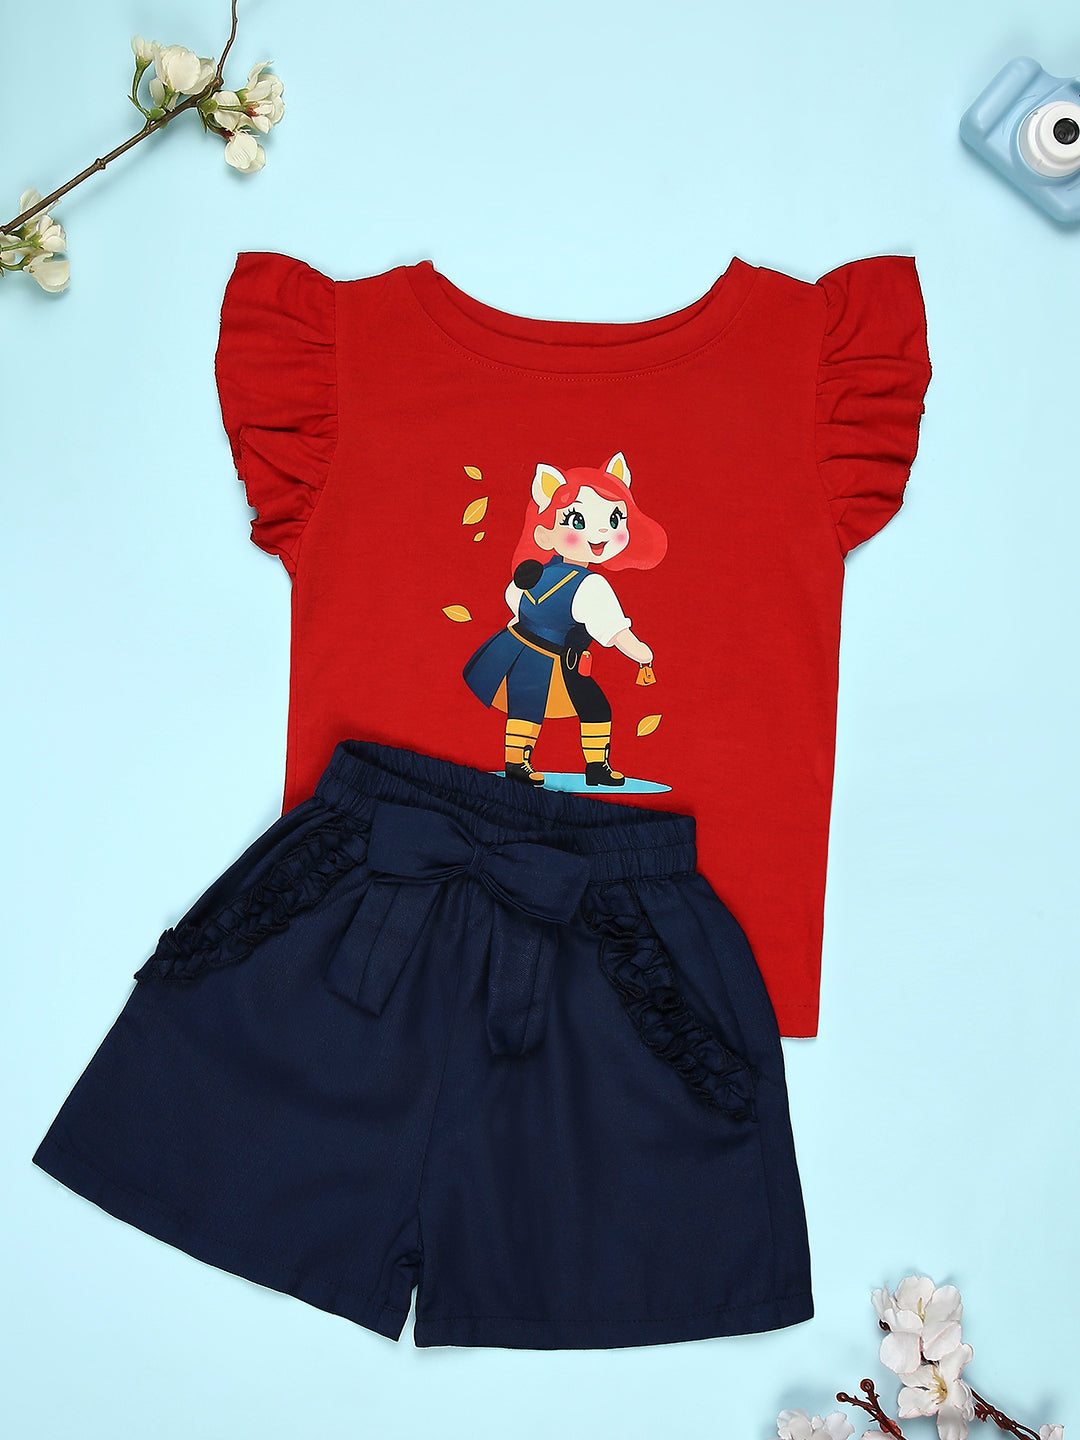 Cutiekins Girls Graphic Print T-Shirt With Solid Embellished Bow Short -Red & Navy Blue